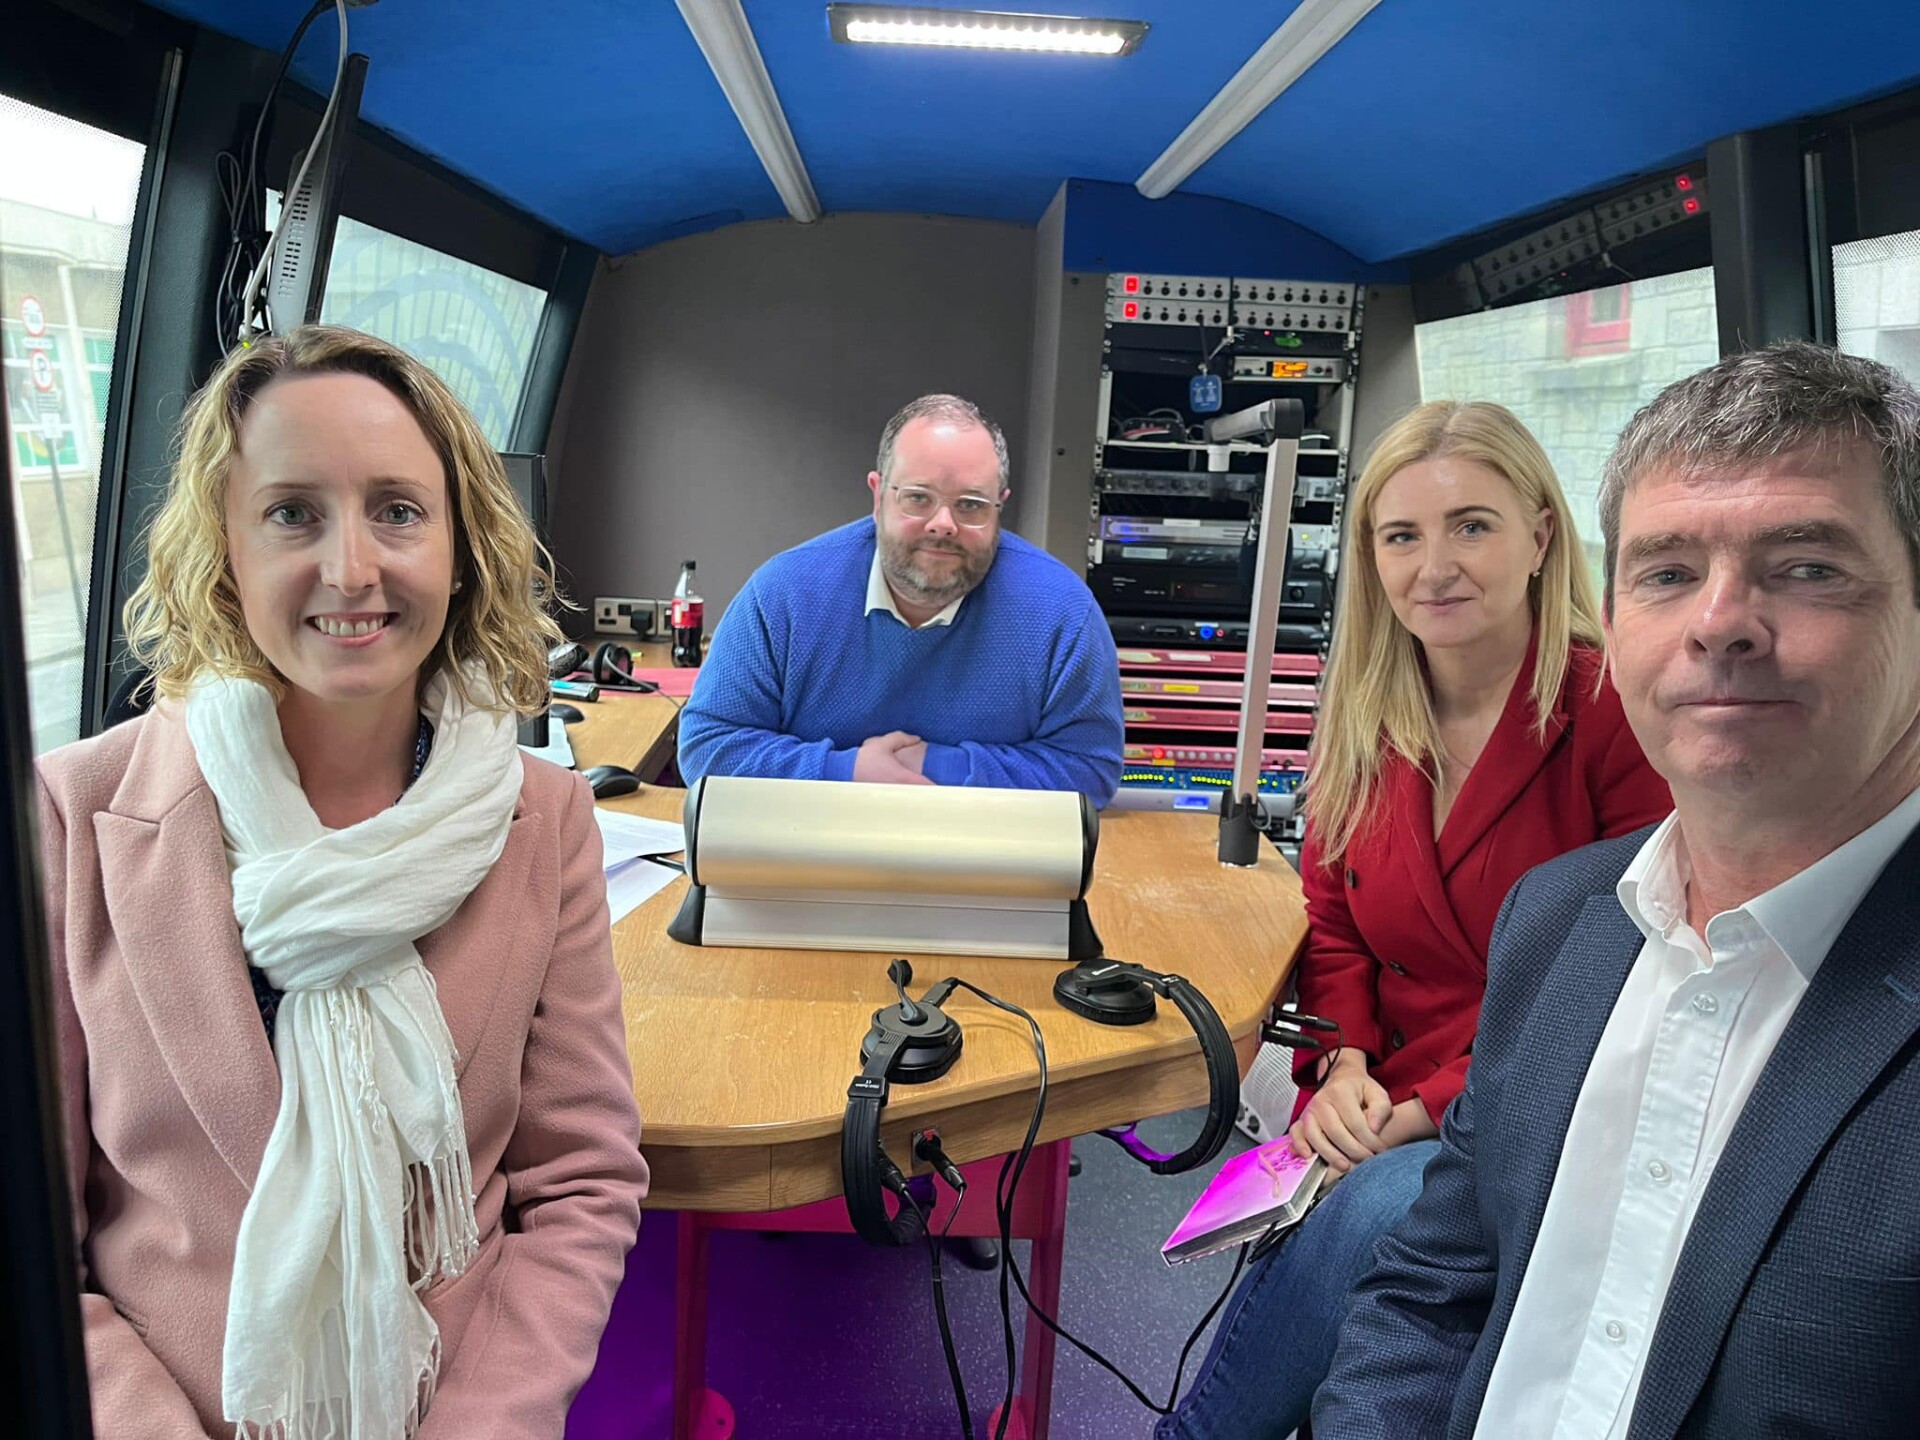 Jessica Martin, Sean Burke and Samantha Donnelly interview with Johnny O'Keefe about apprenticeships